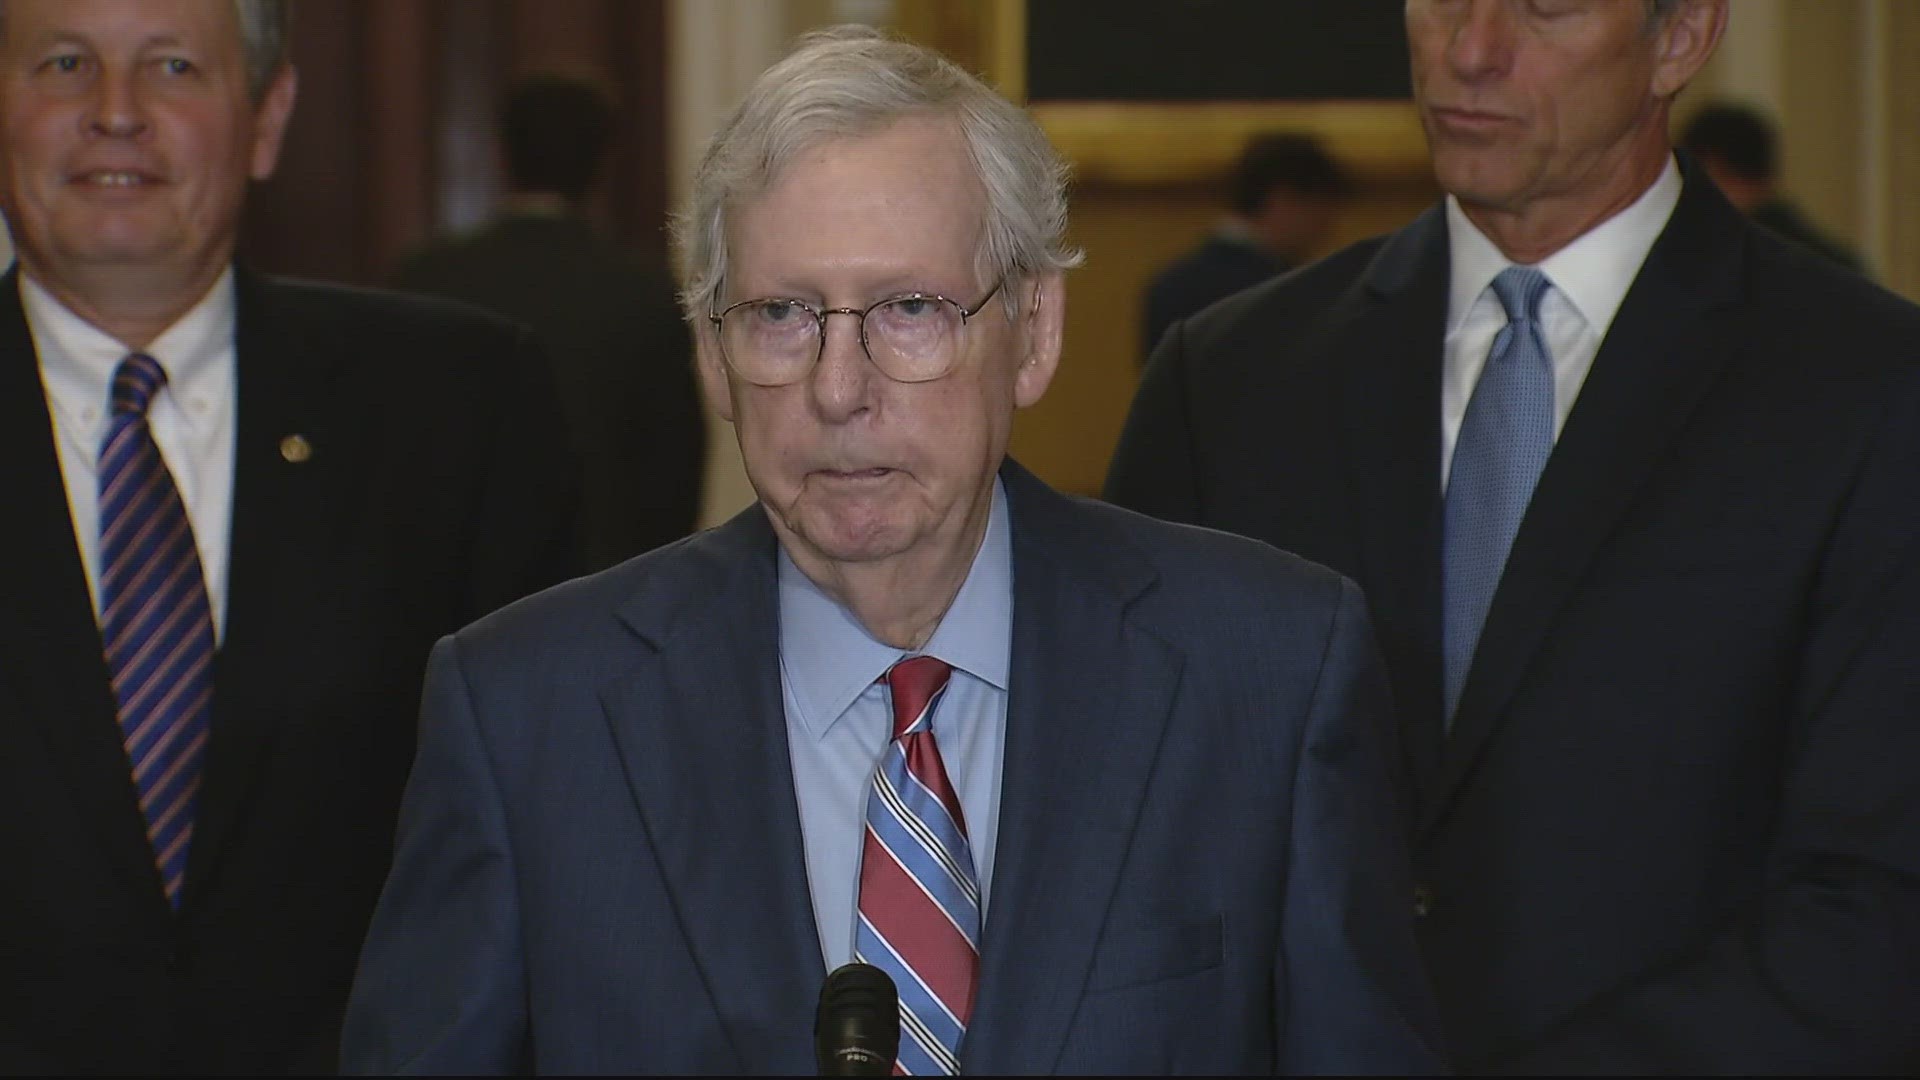 Senate Minority Leader Mitch McConnell suddenly stopped speaking during his weekly press conference.